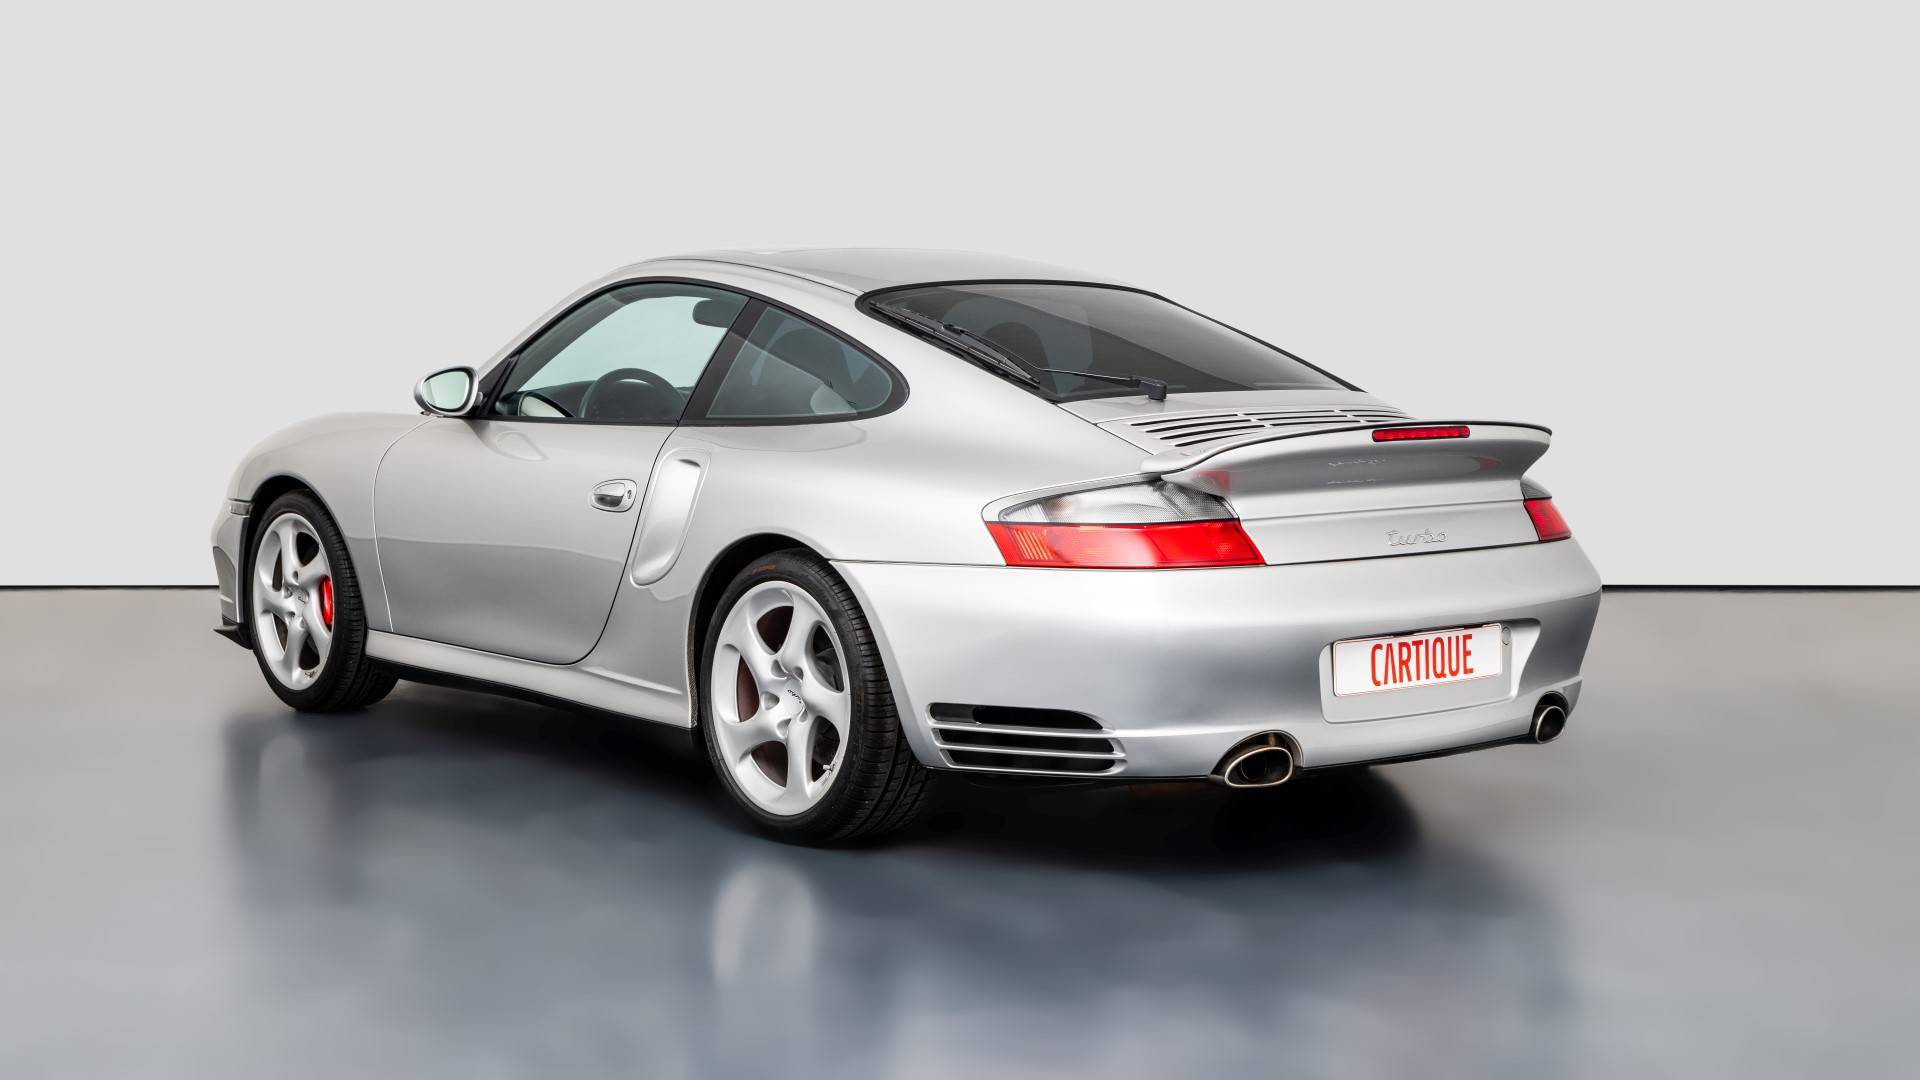 For Sale: Porsche 911 Turbo (WLS) (2002) offered for $244,517